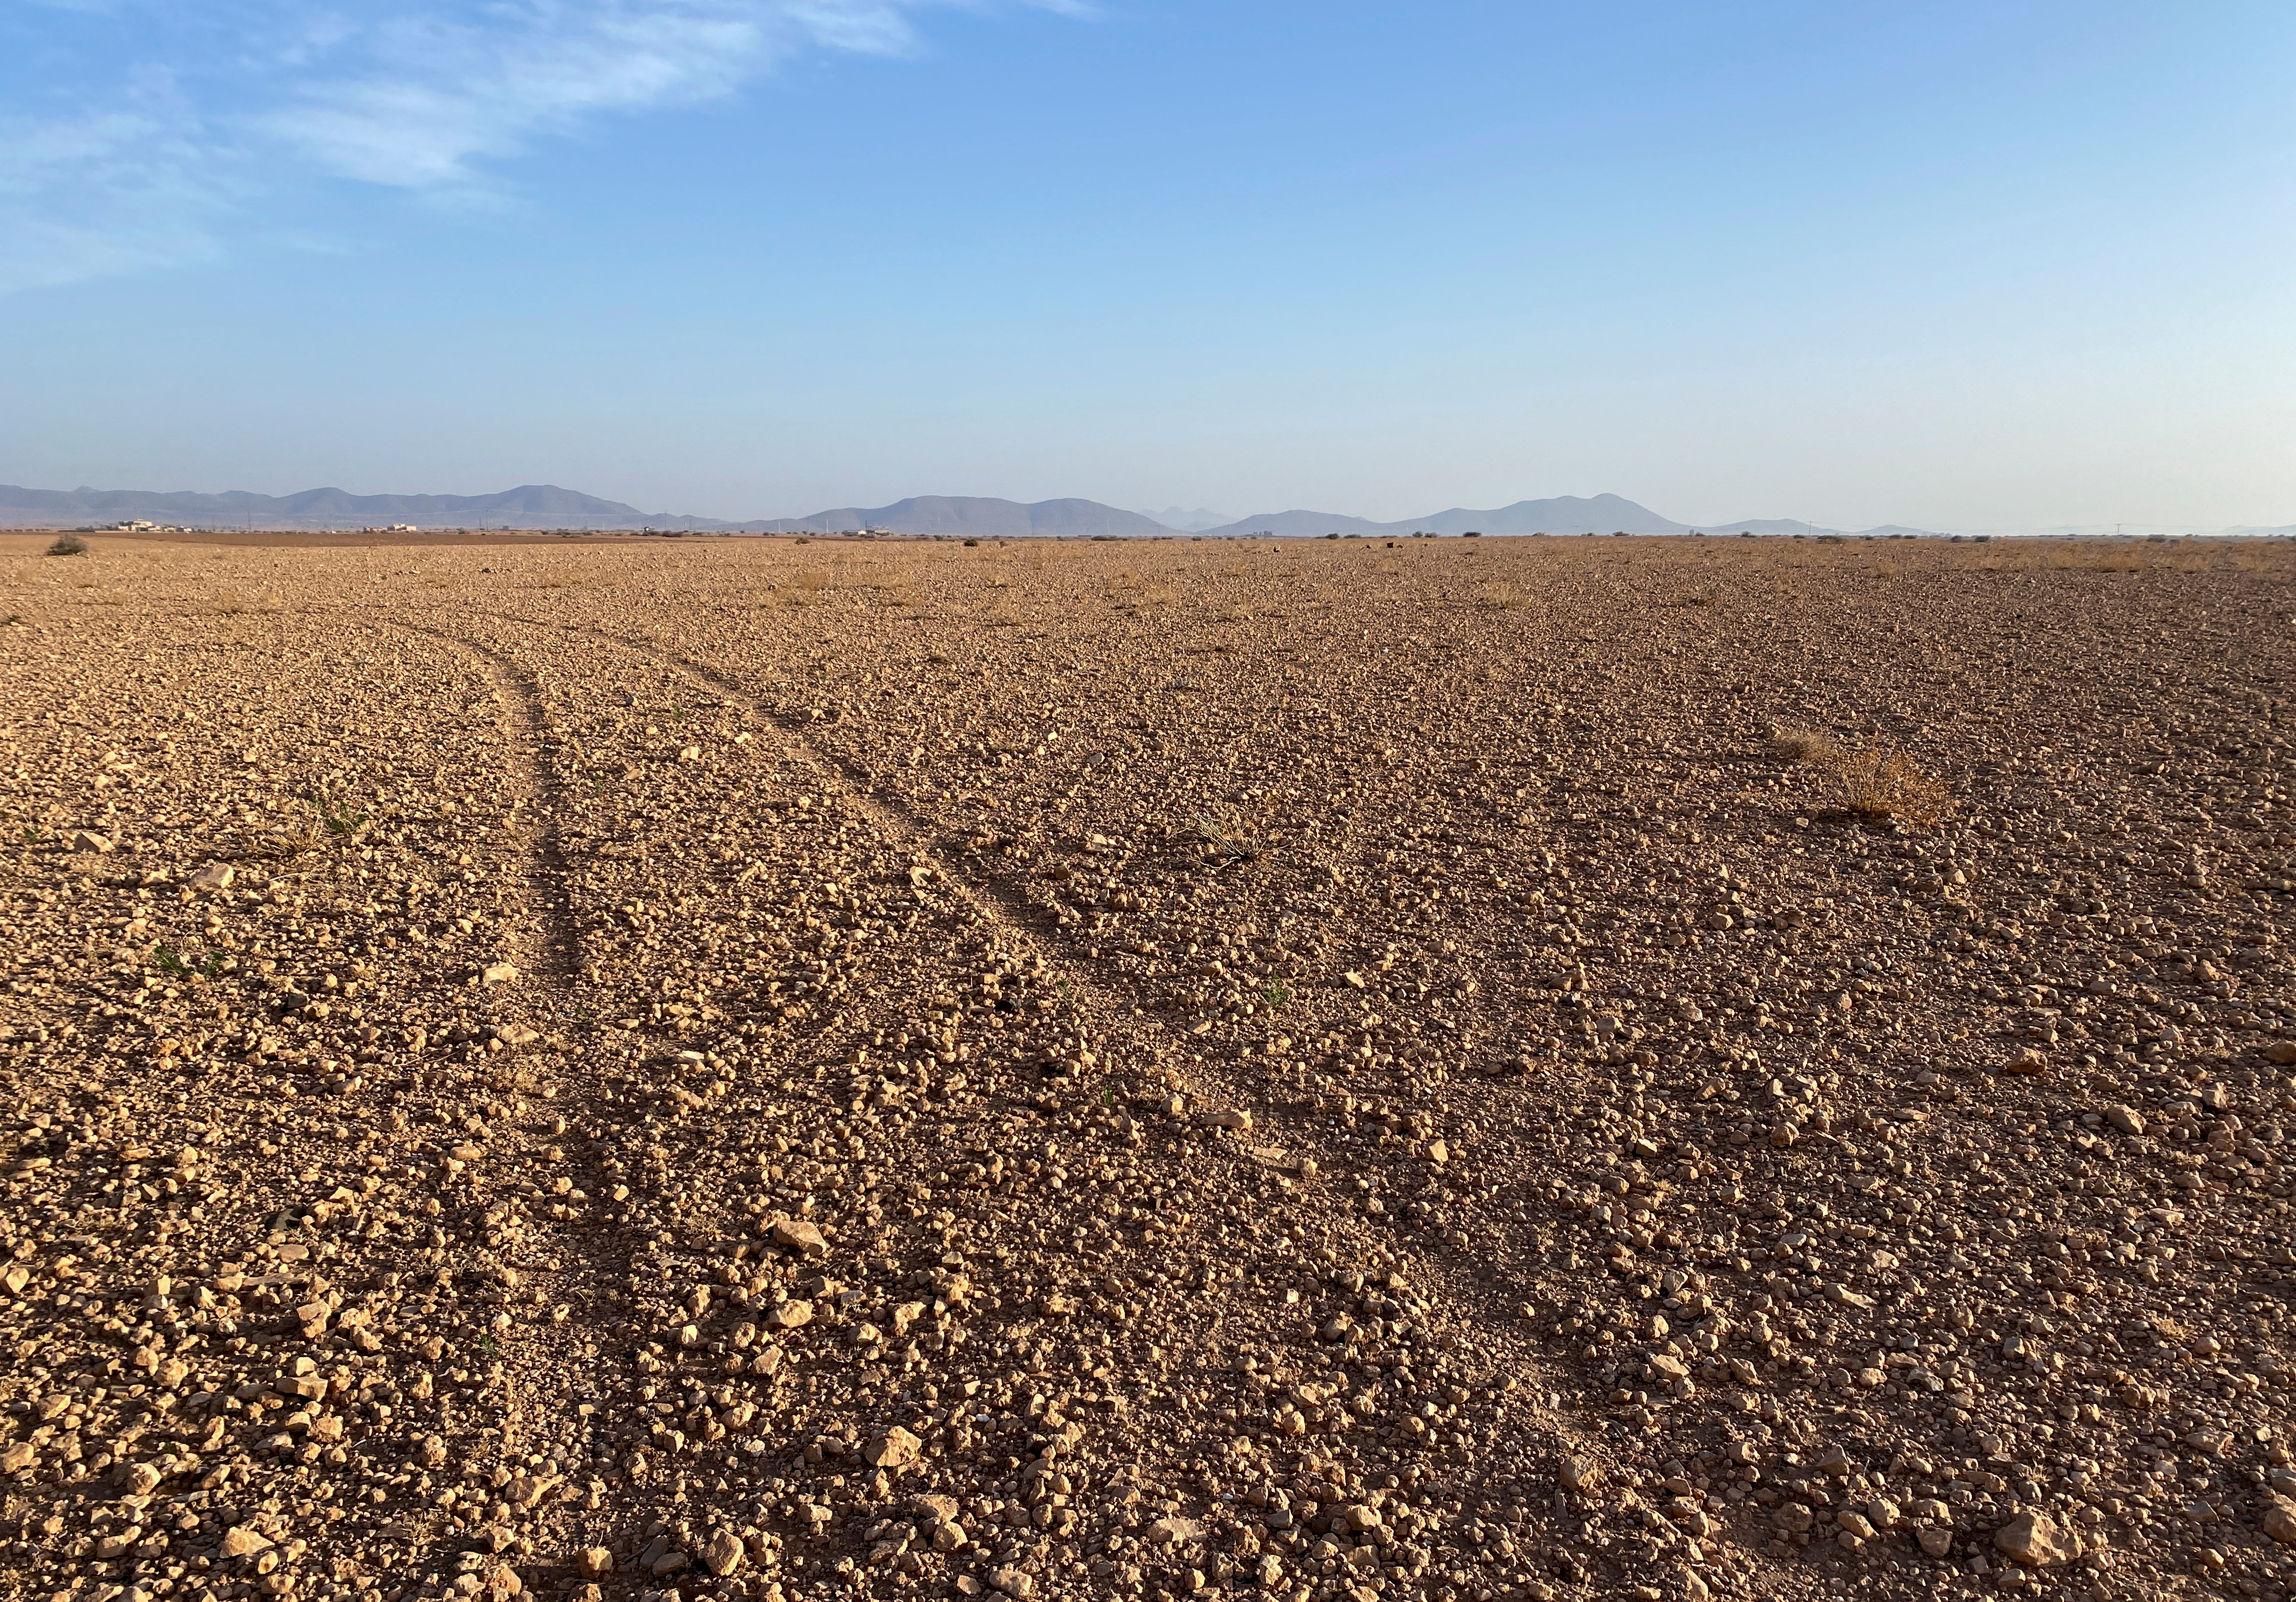 A dry field is pictured near Marrakech